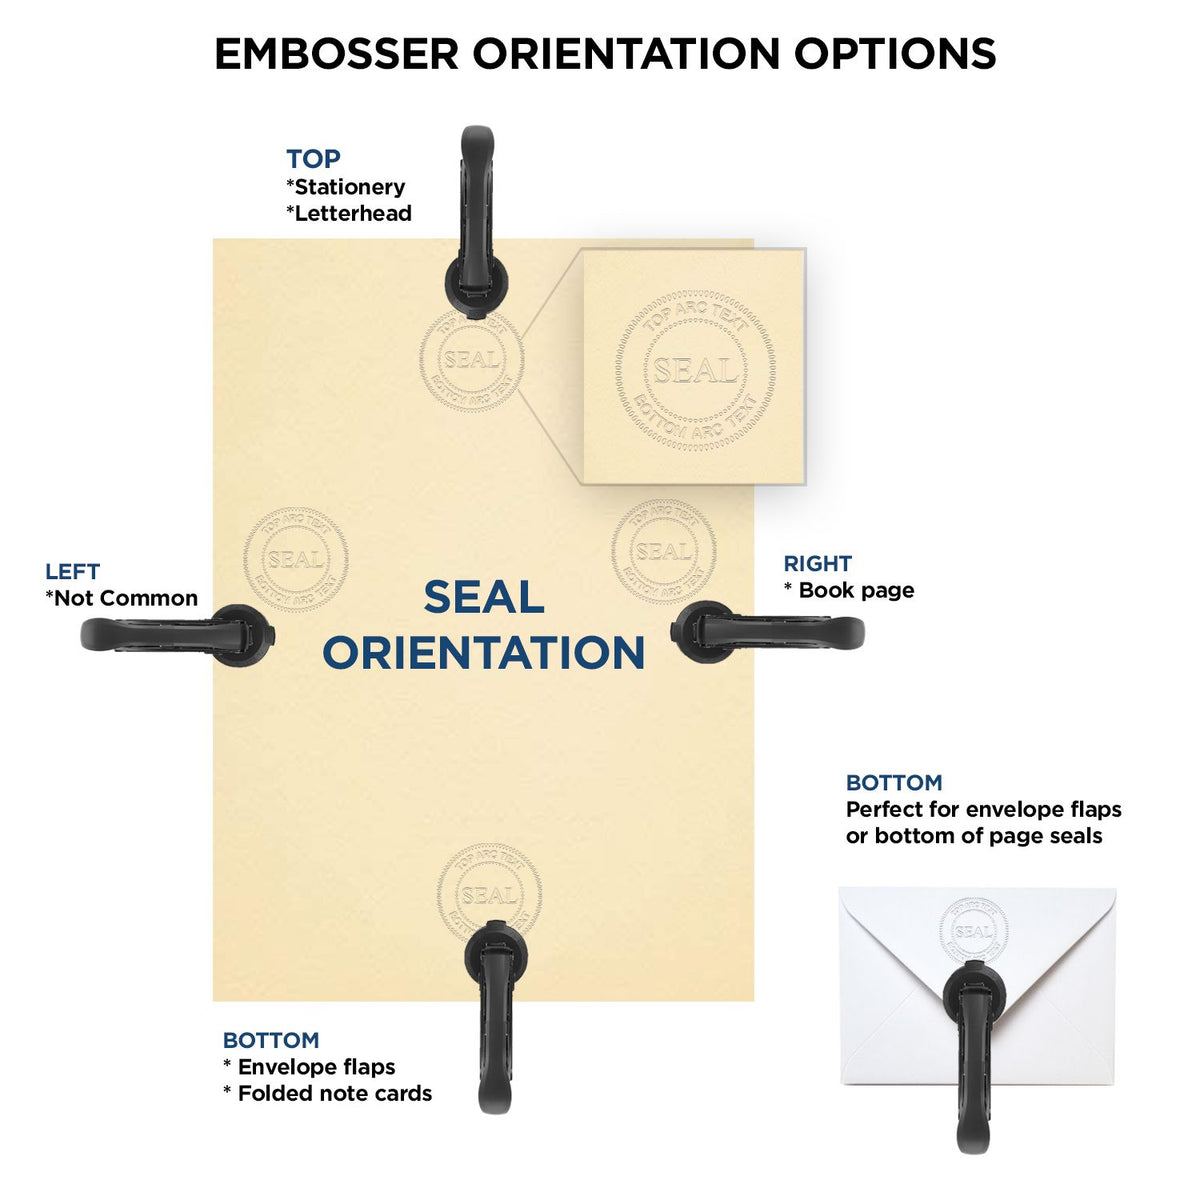 An infographic for the Long Reach Nevada Land Surveyor Seal showing embosser orientation, this is showing examples of a top, bottom, right and left insert.